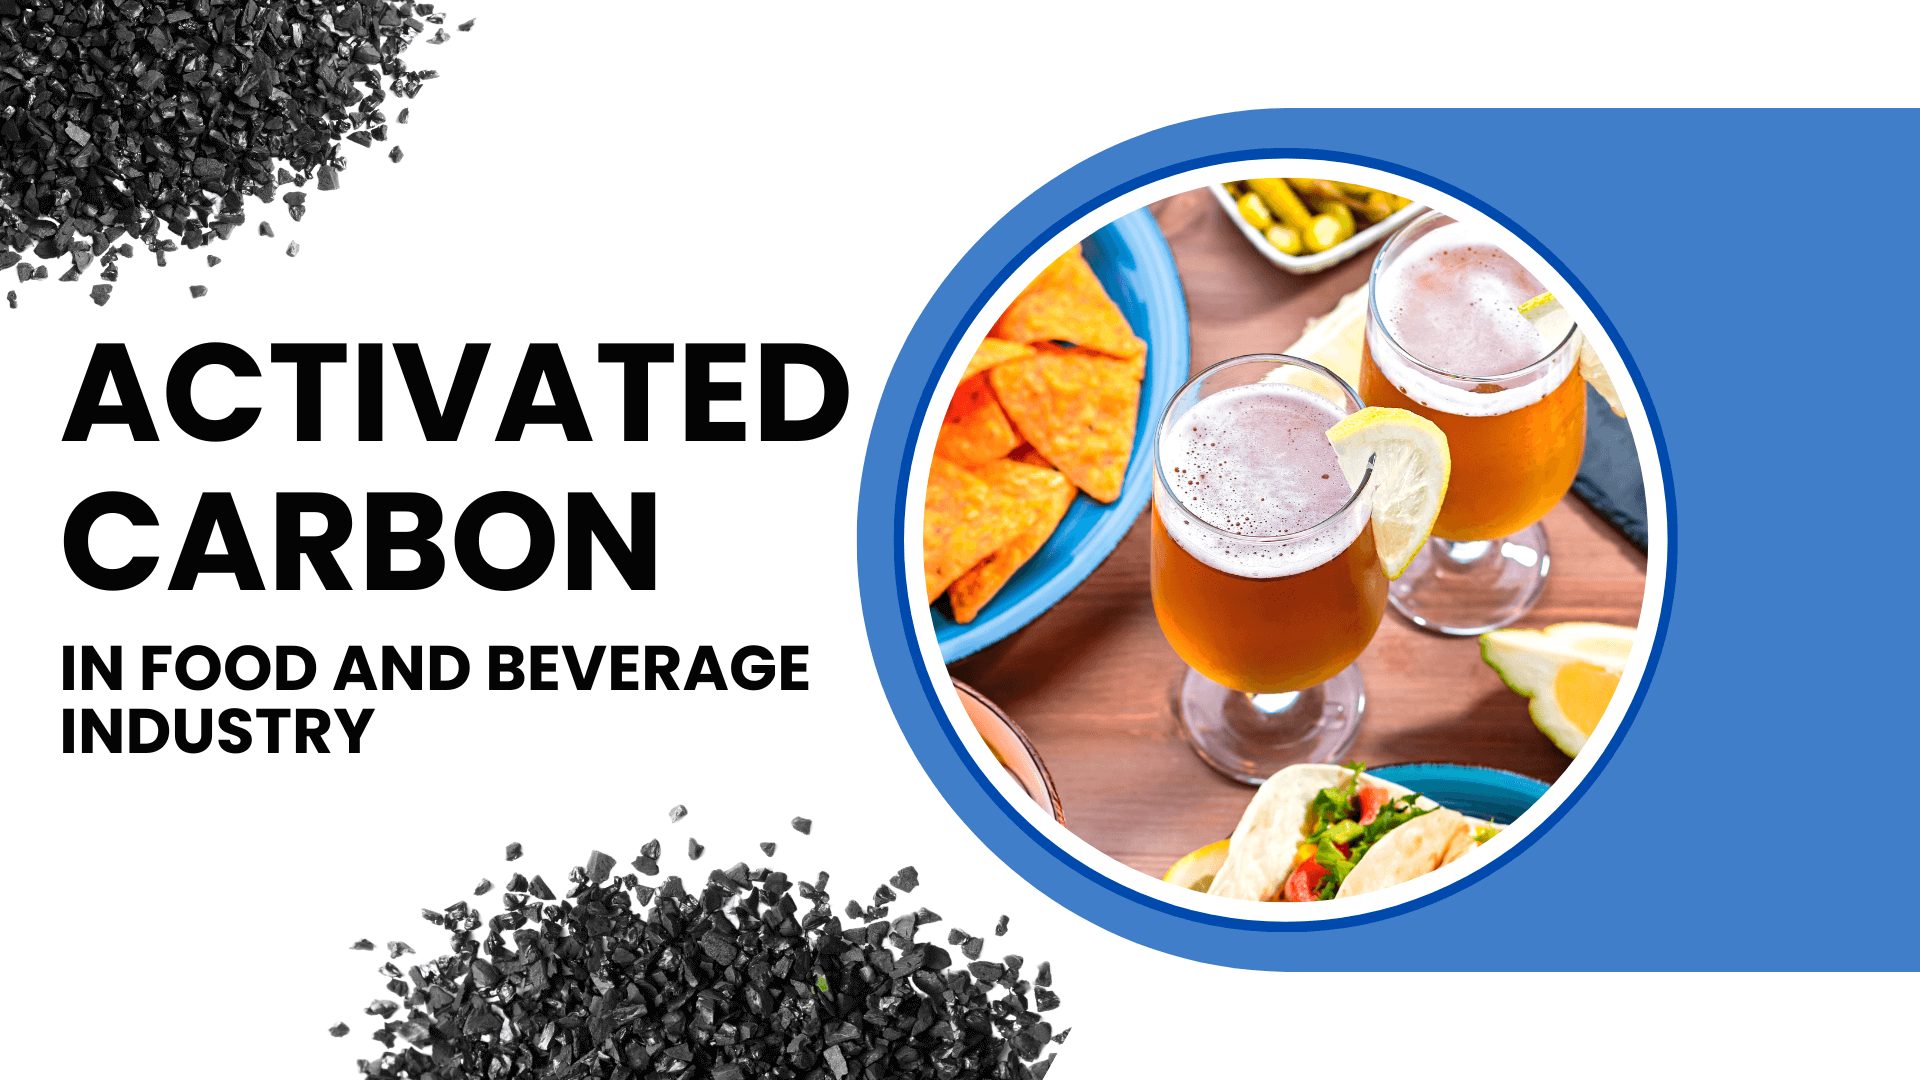 SBS - Activated Carbon in Food and Beverage Industry